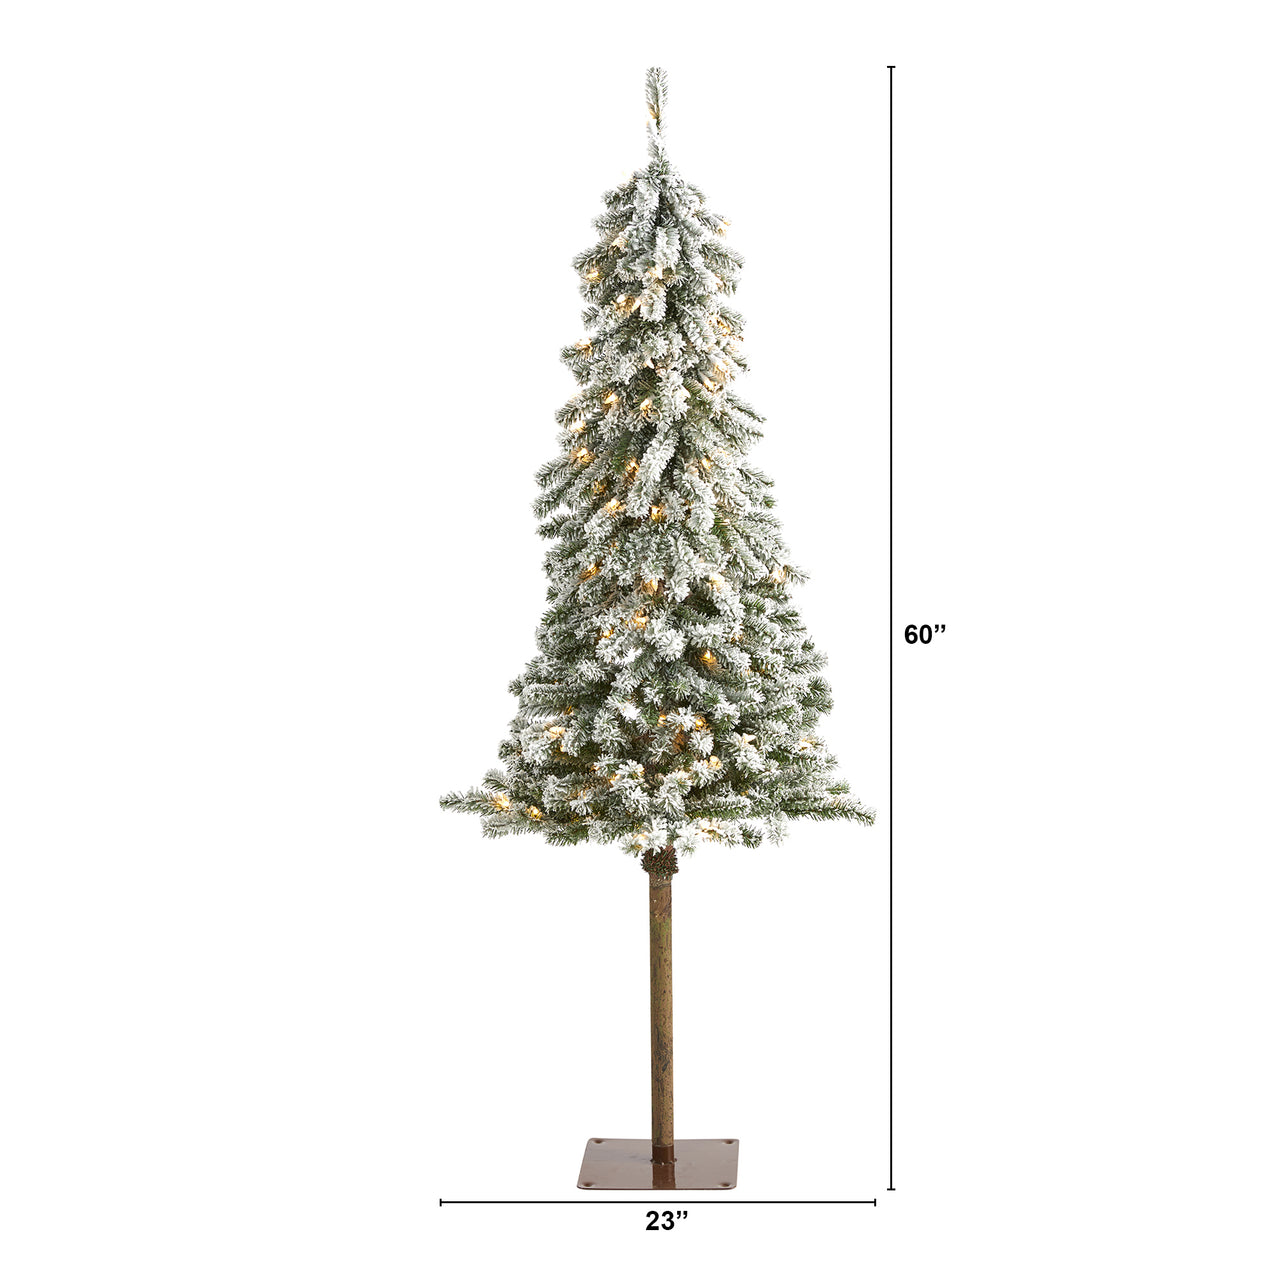 5’ Flocked Alpine Christmas Artificial Tree With 150 Lights And 405 Bendable Branches